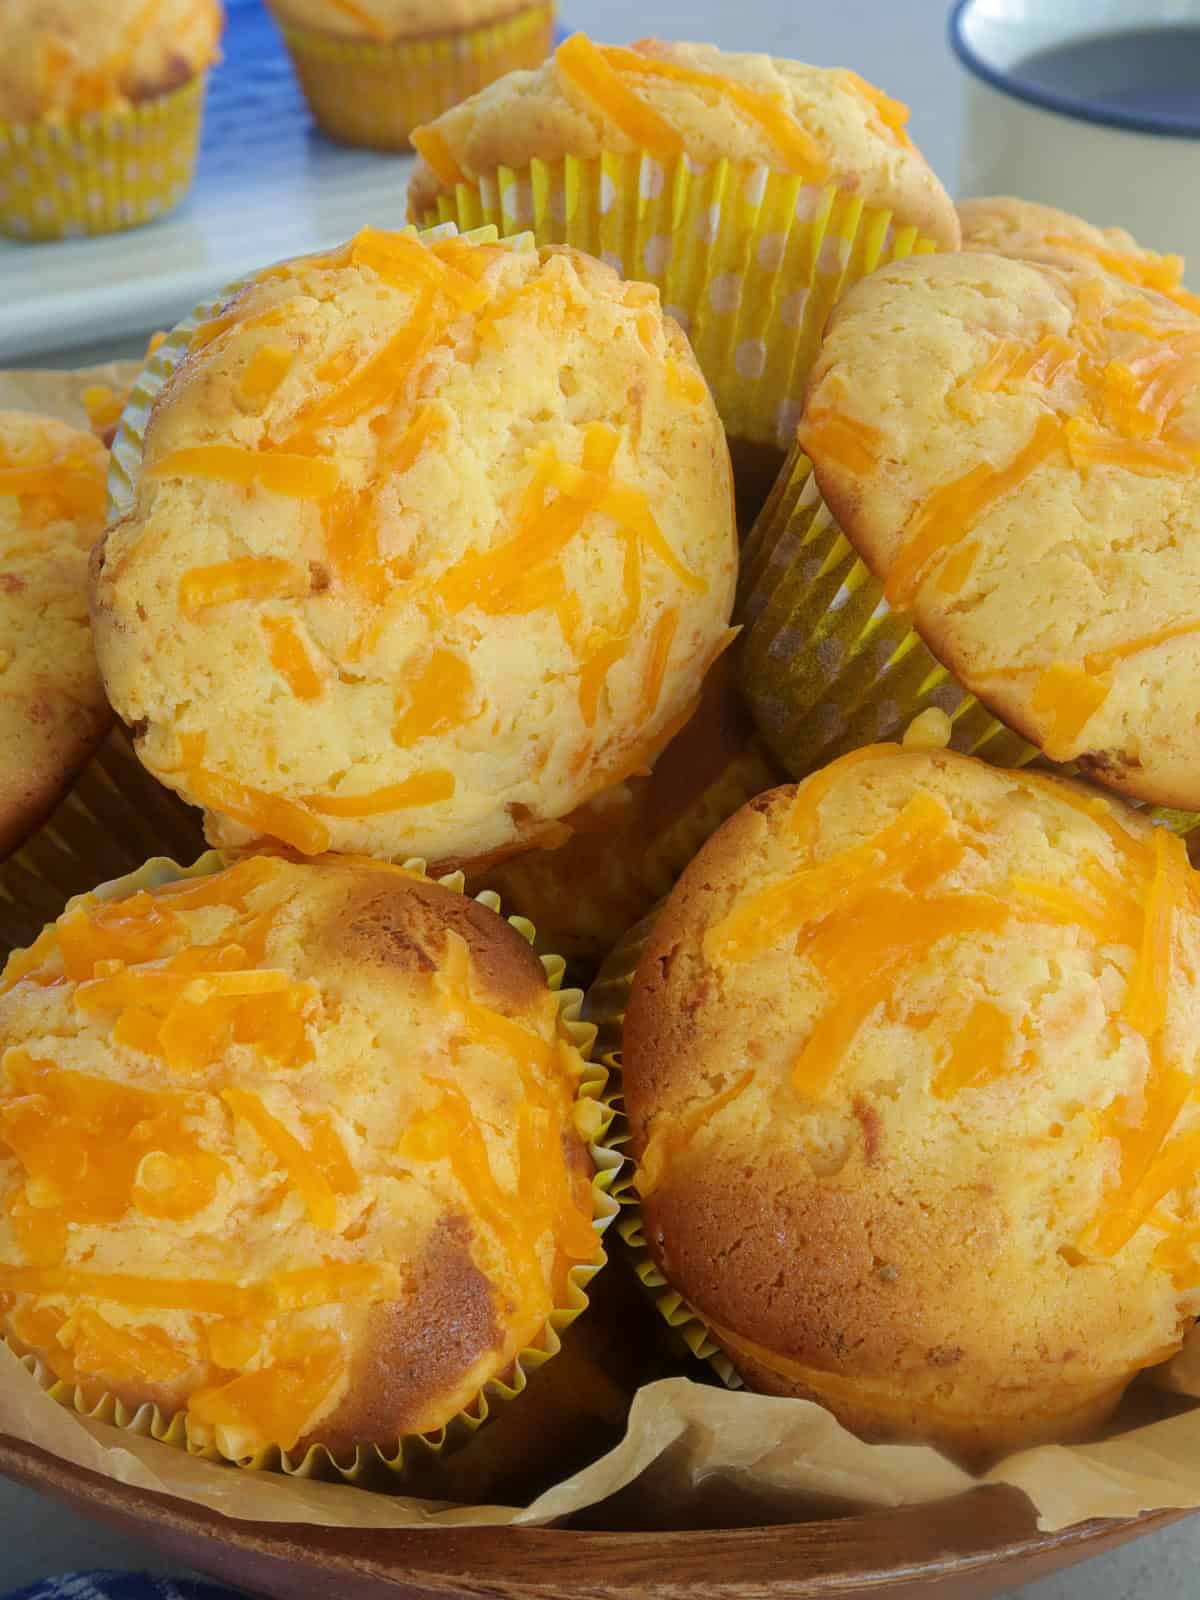 cheese cupcakes in a basket.